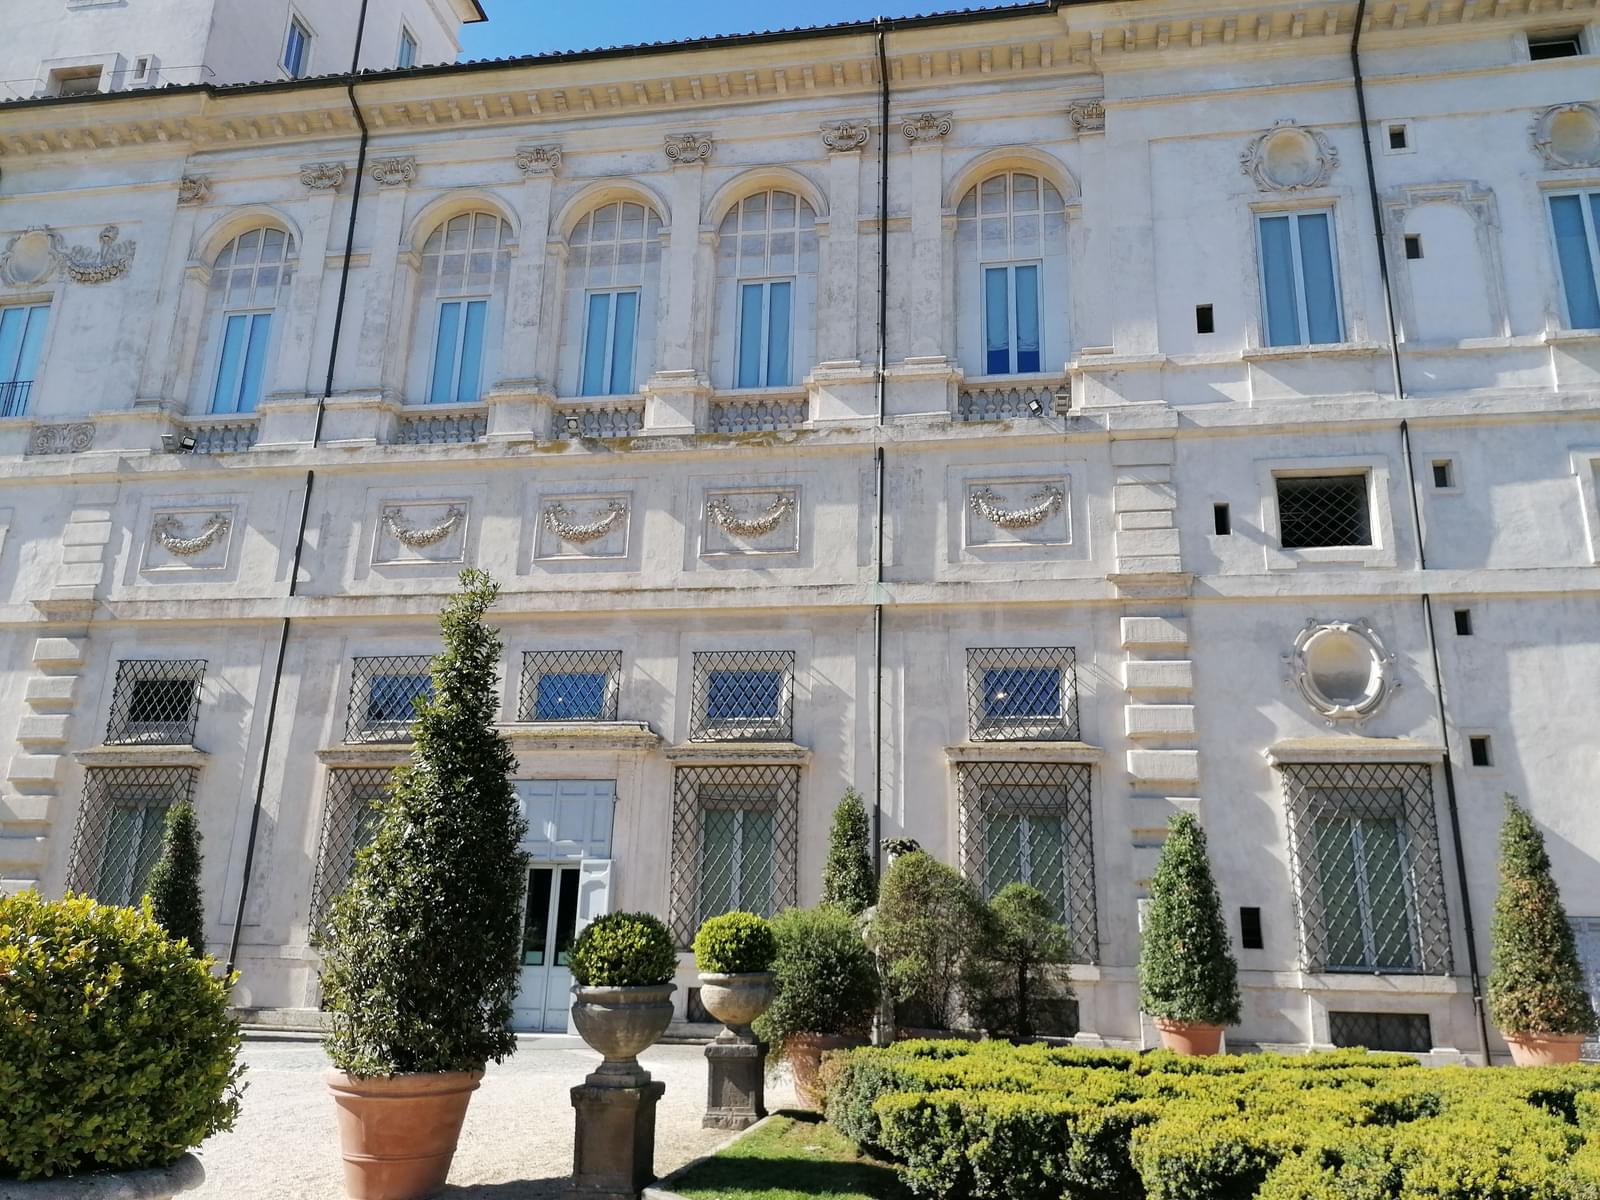 Tips to visit Galleria Borghese